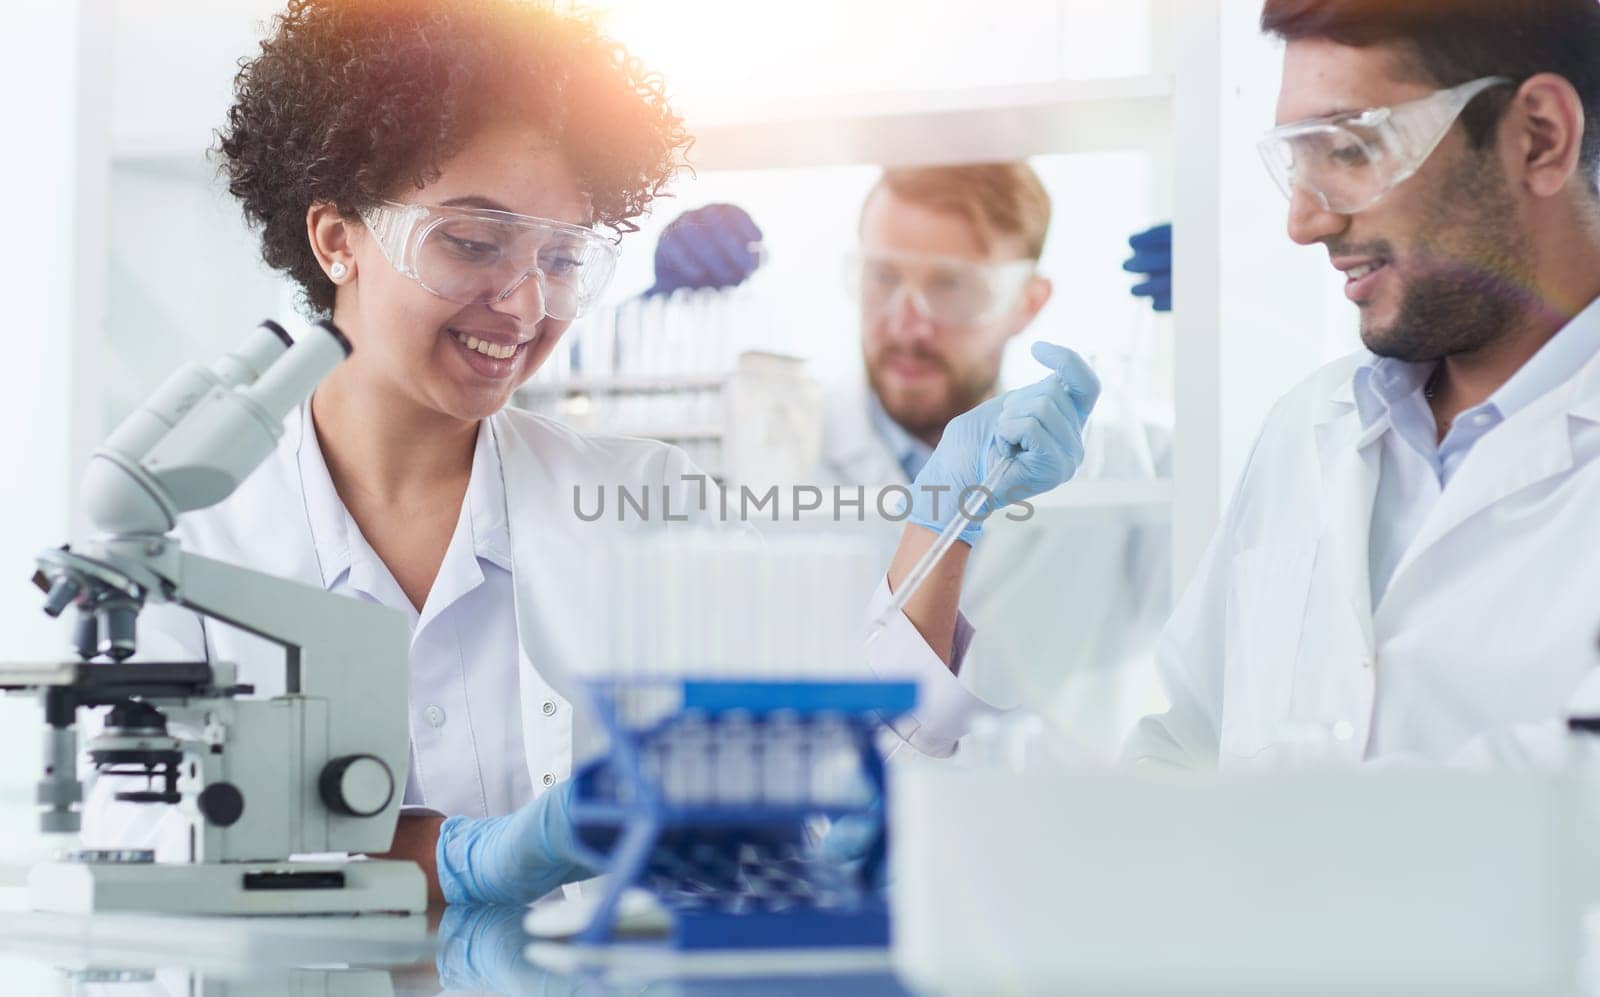 Team of Scientists Working Using Microscope, Analysing Microbiology Samples